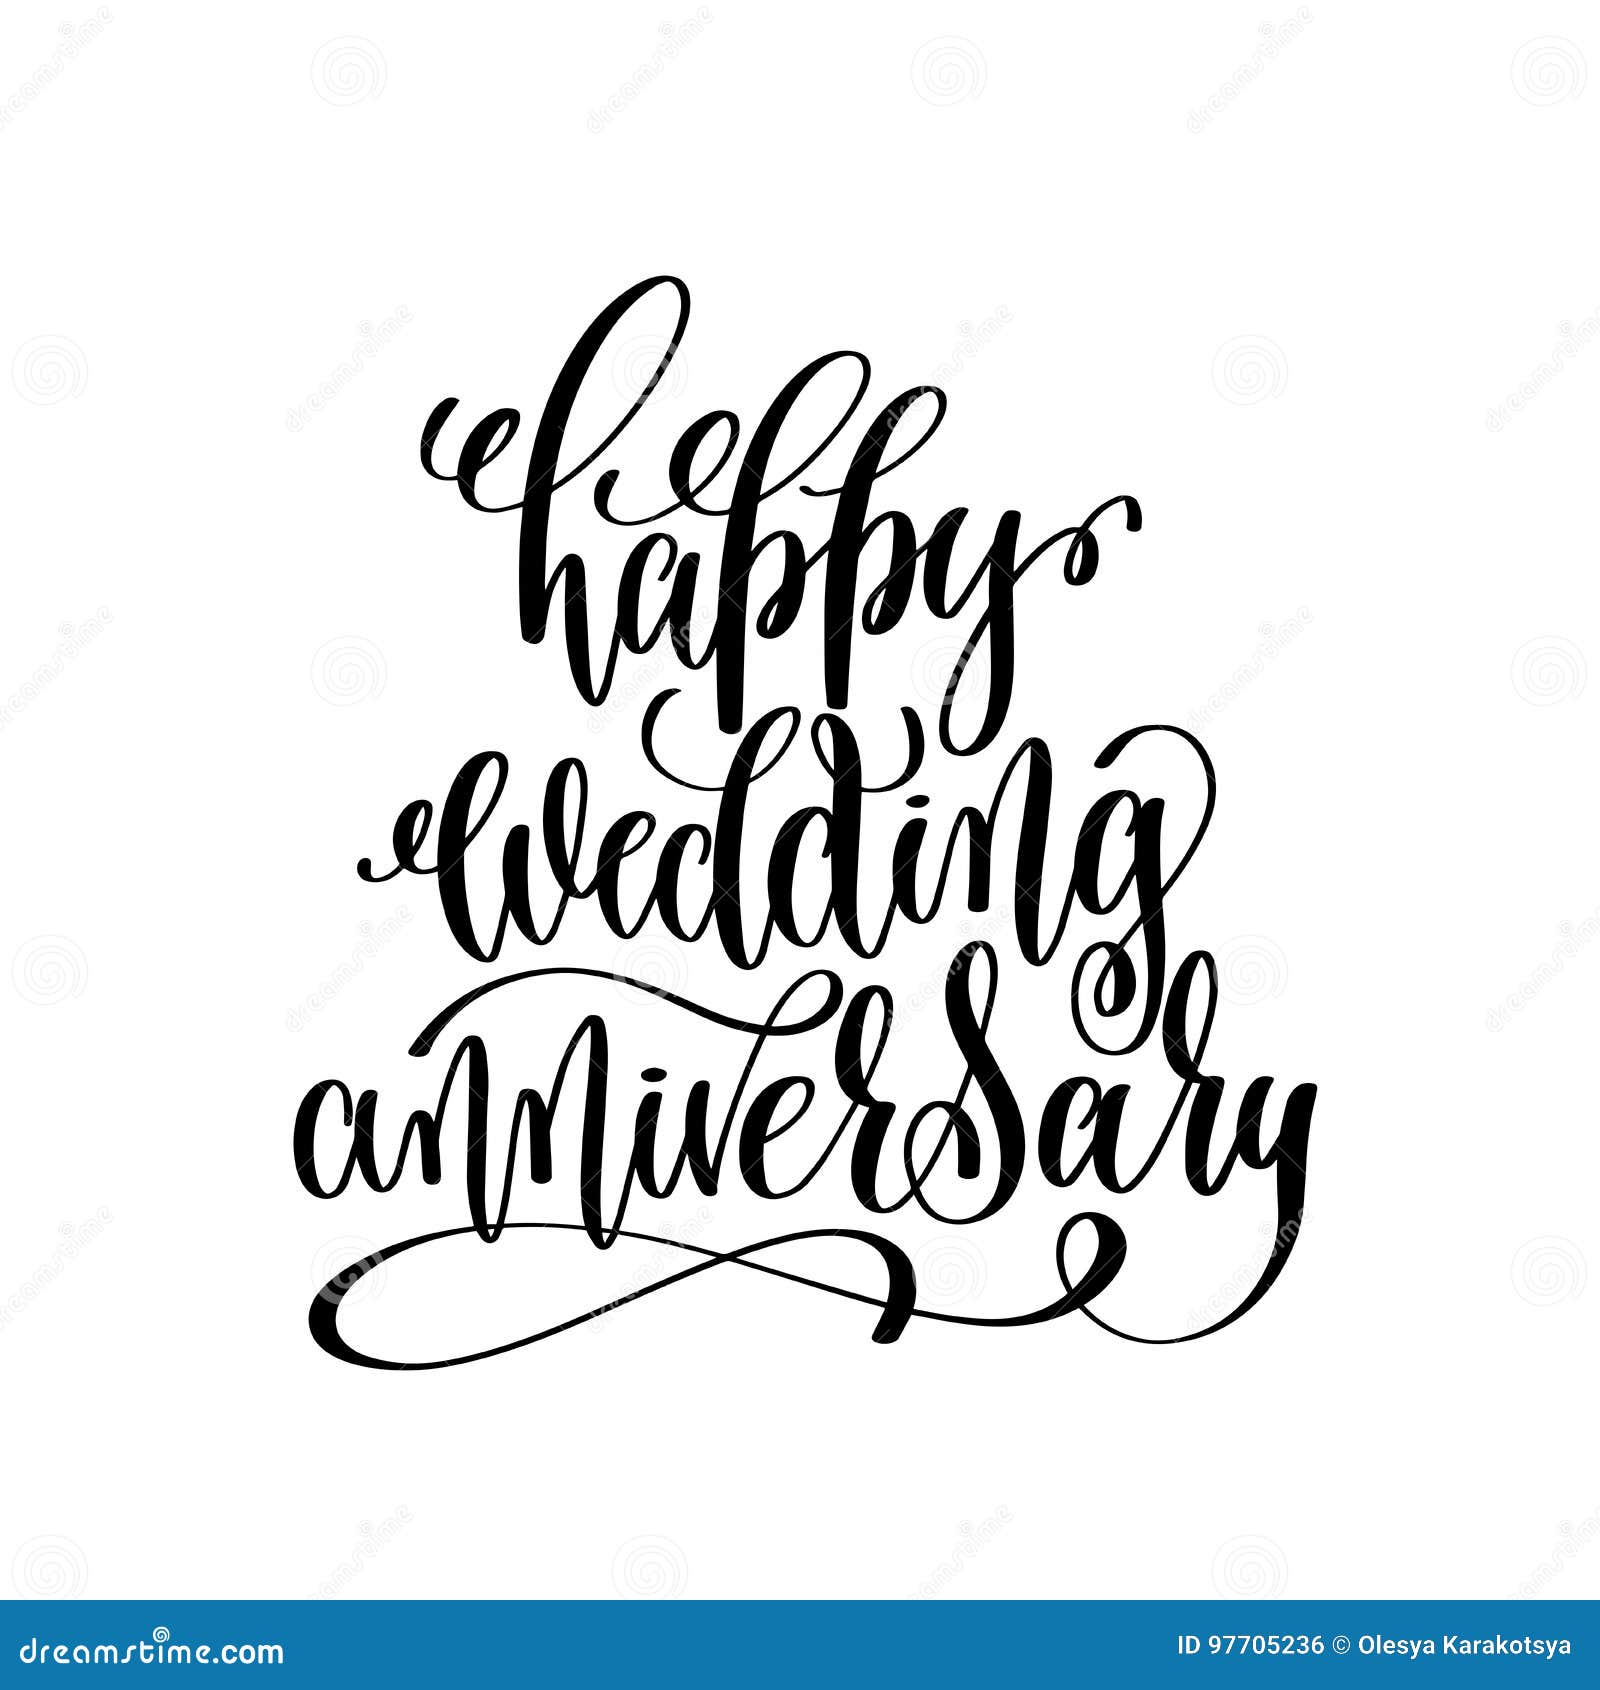 Happy Wedding Anniversary - Black and White Hand Ink Lettering ...